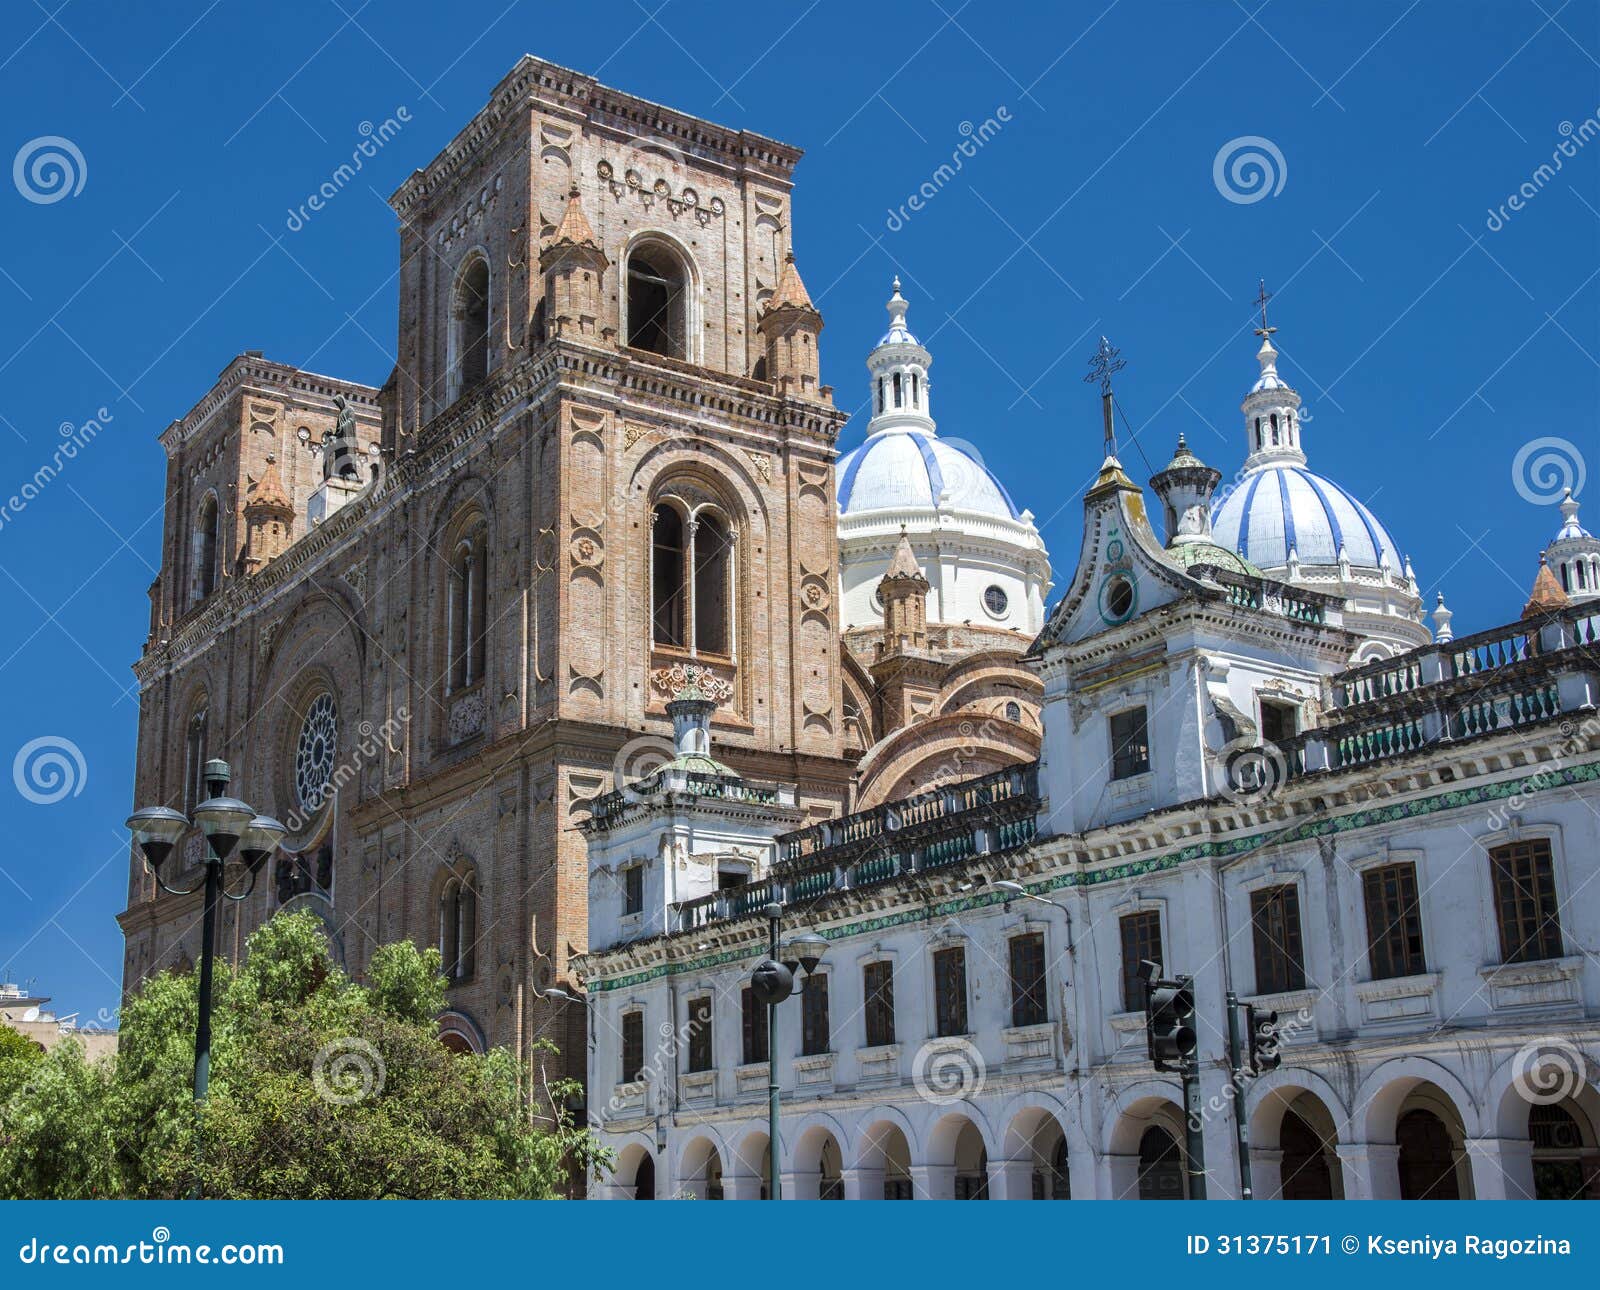 cuenca - cathedral of the immaculate conception, ecuador